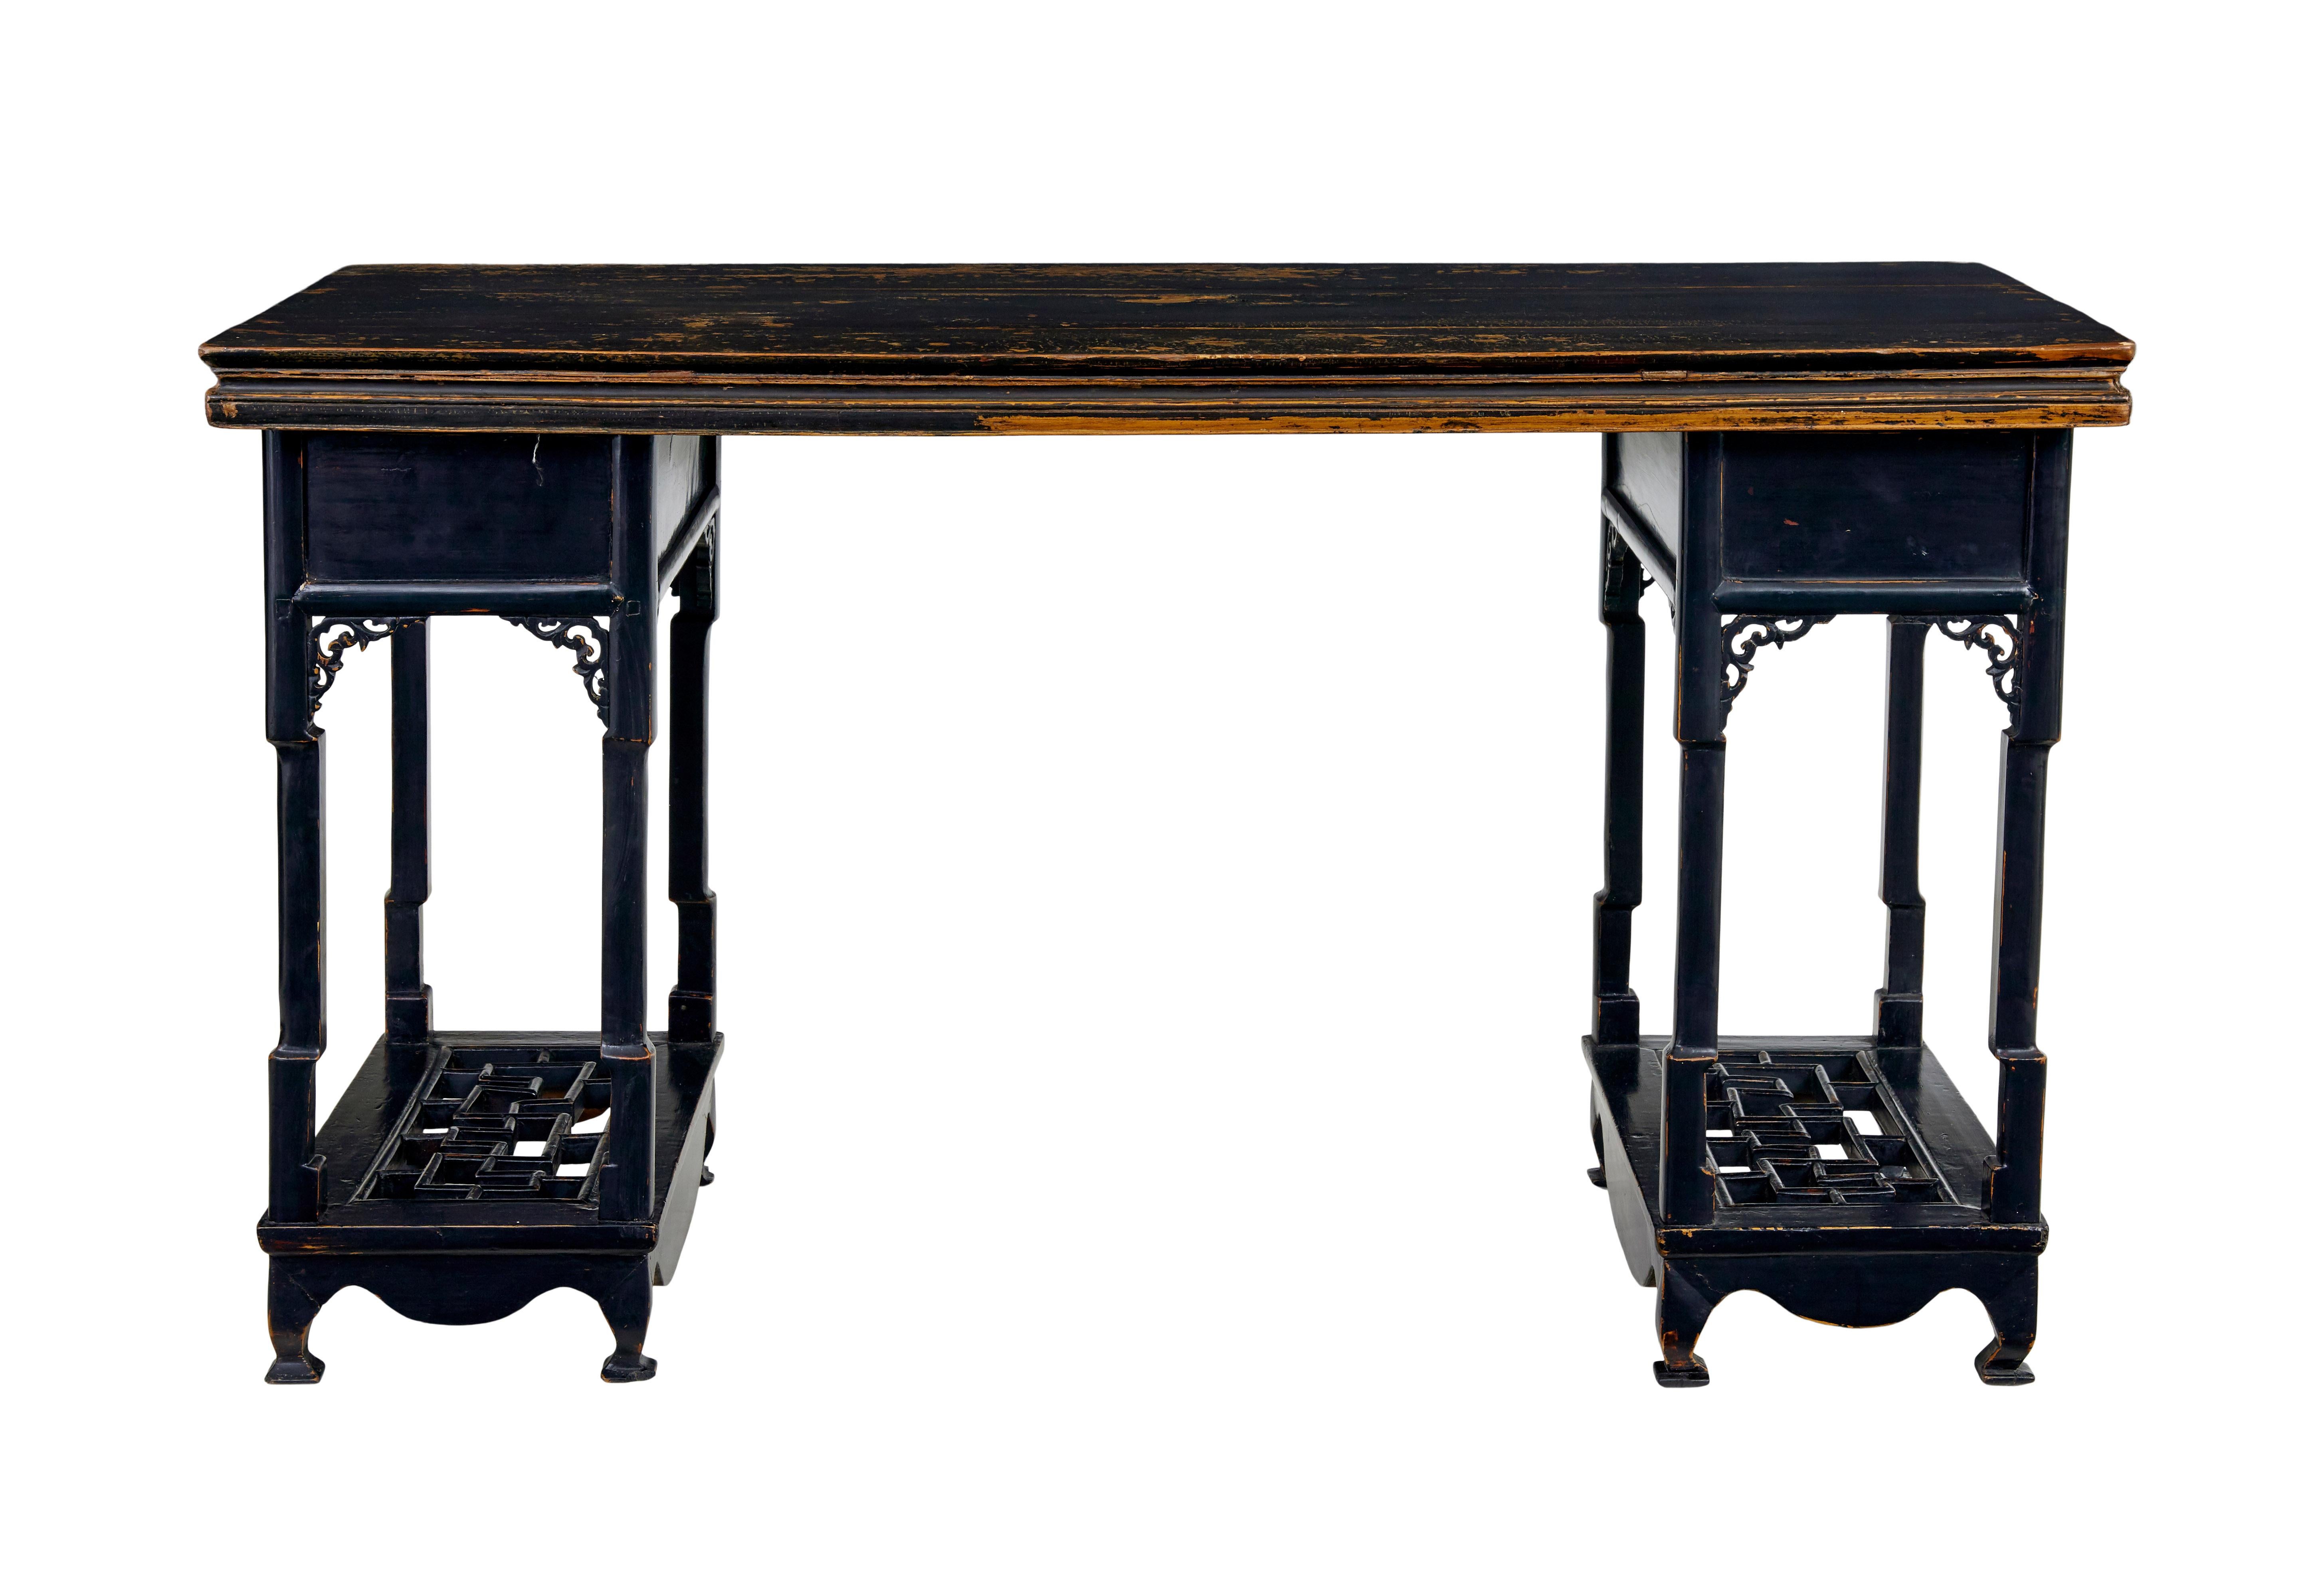 19th century Chinese black lacquered desk 2